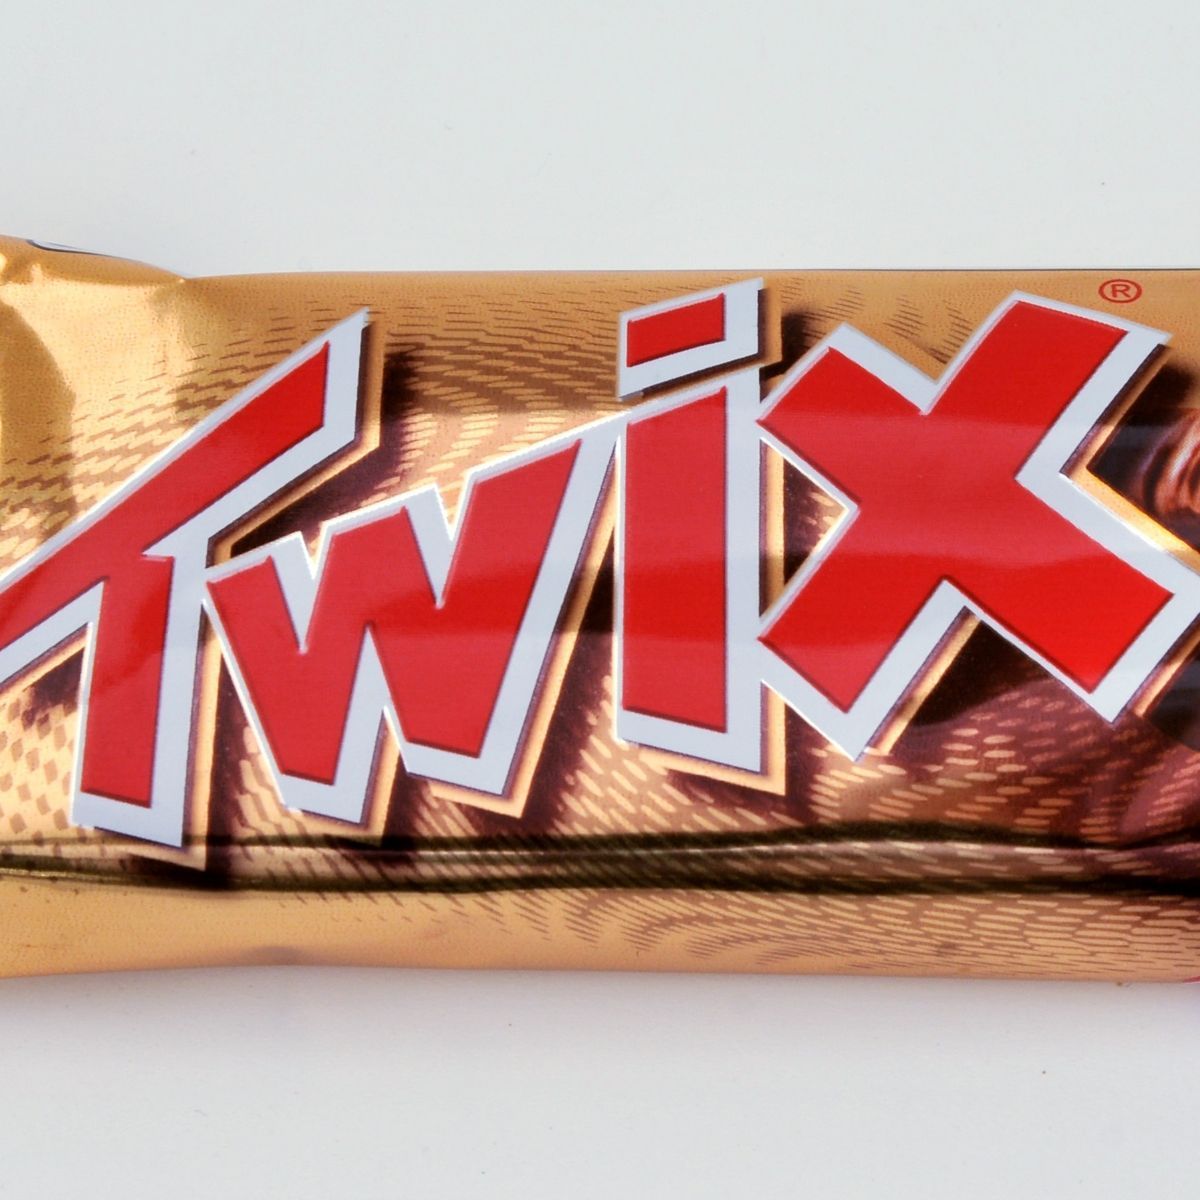 Differences Between the Twix Bars